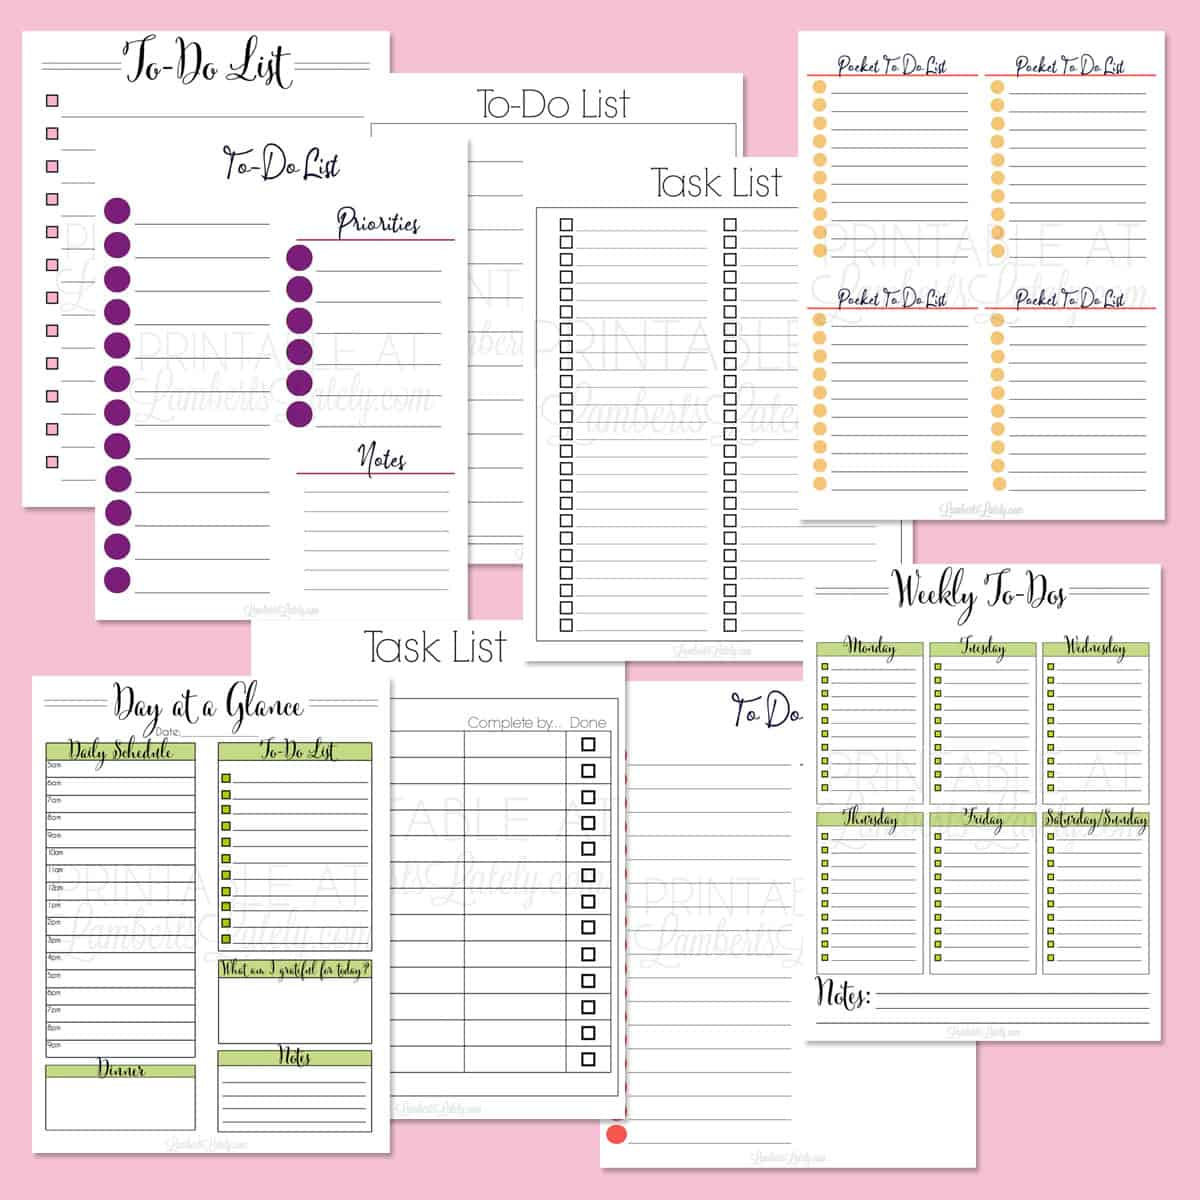 33 Free Printable To Do List Templates | Lamberts Lately intended for Free Printable Forms for Organizing